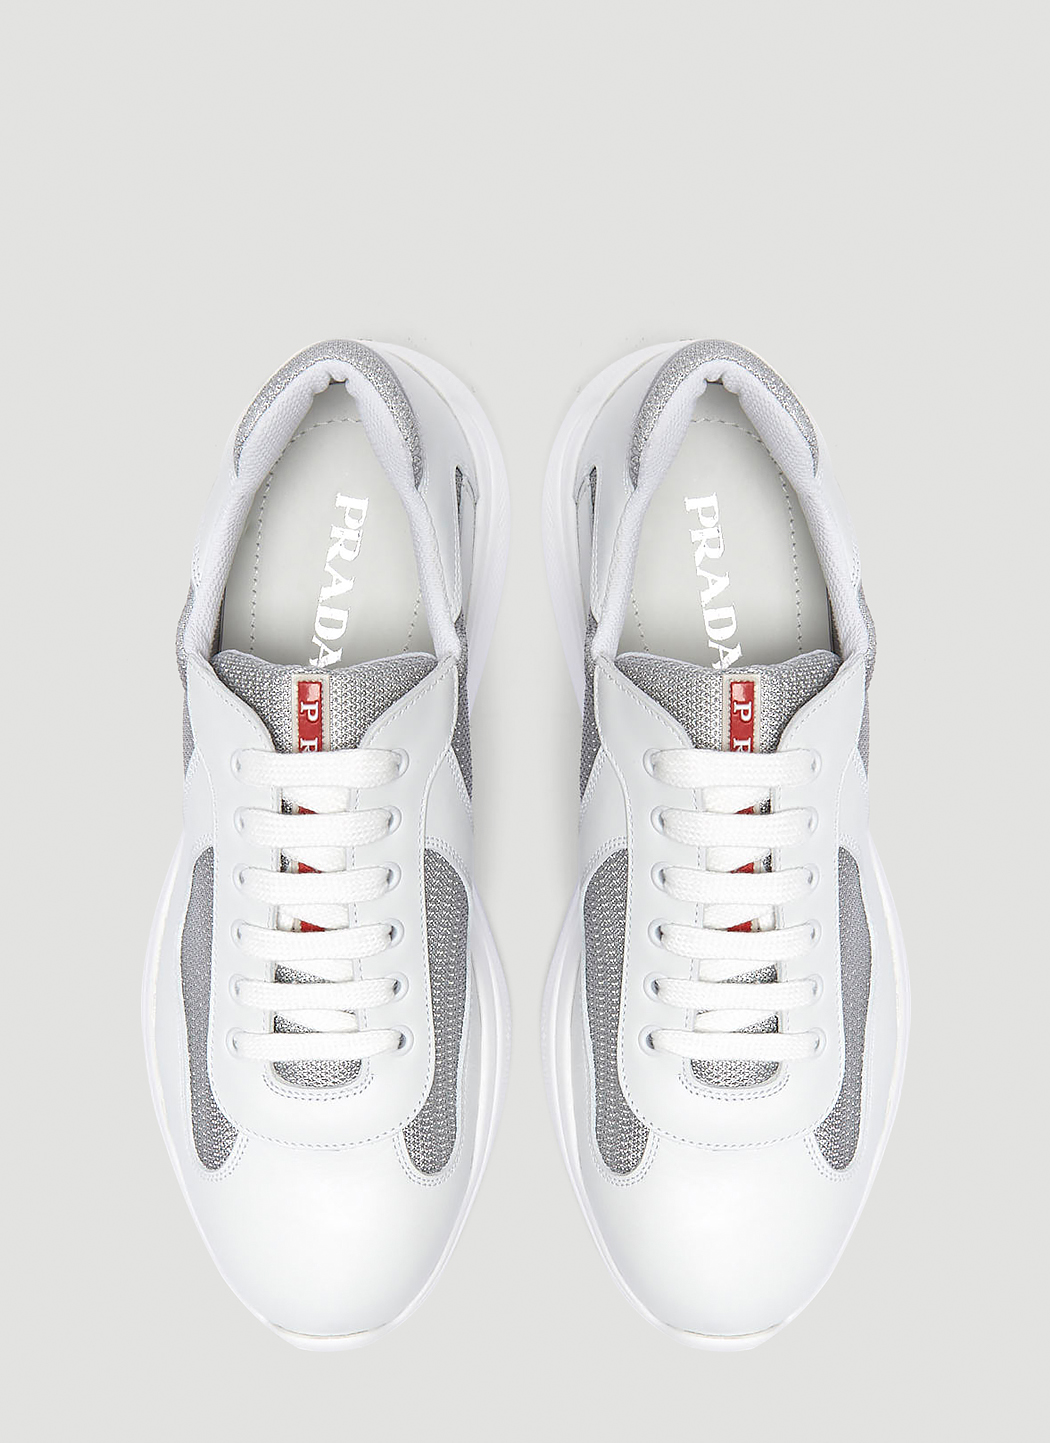 Prada Americas Cup Lace-Up Sneakers in White | LN-CC